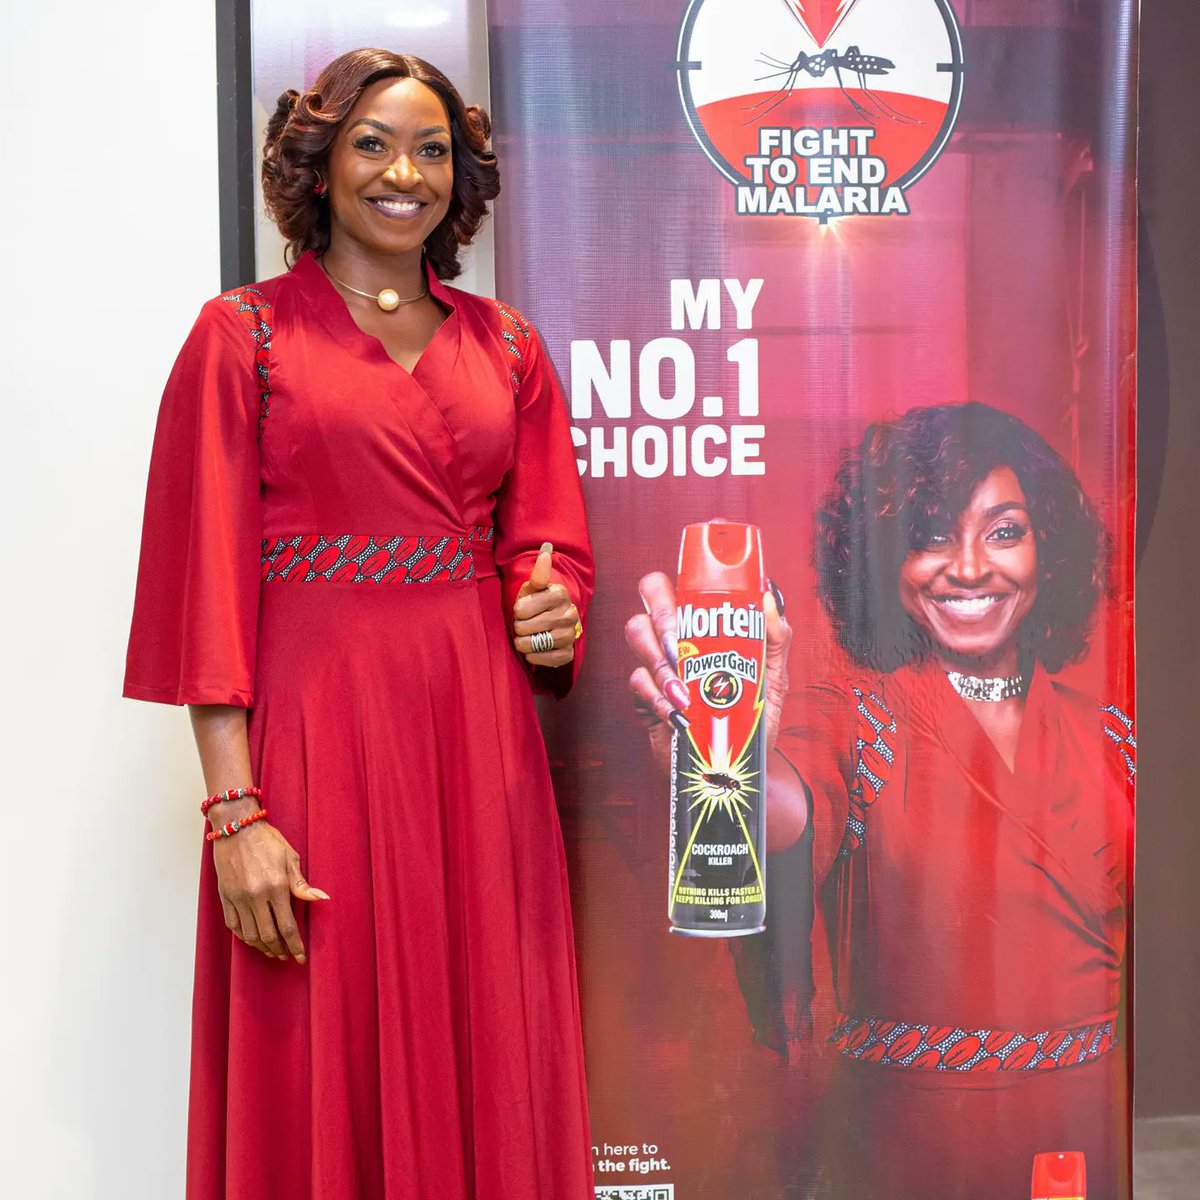 I am delighted to announce that I have been made the new Brand Ambassador for Mortein Insecticide brands and will be championing the 'Fight to End Malaria' initiative.
You have seen the statistics on Malaria in Nigeria. 
We can do better.
Let's fight to end Malaria
#EndMalaria